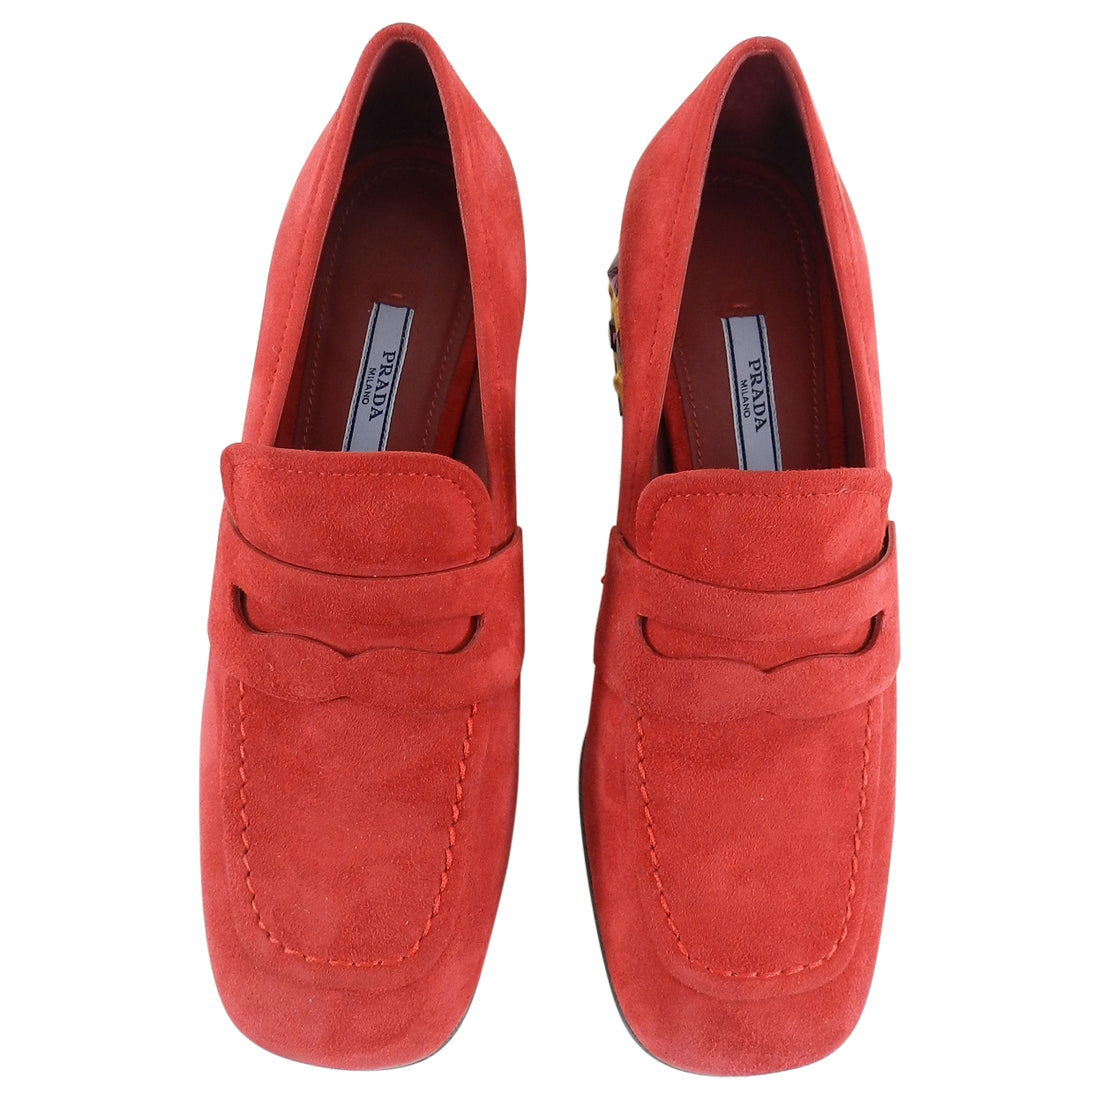 Prada Red Suede Loafer with Gold Metal Jewel Heels - 37.5